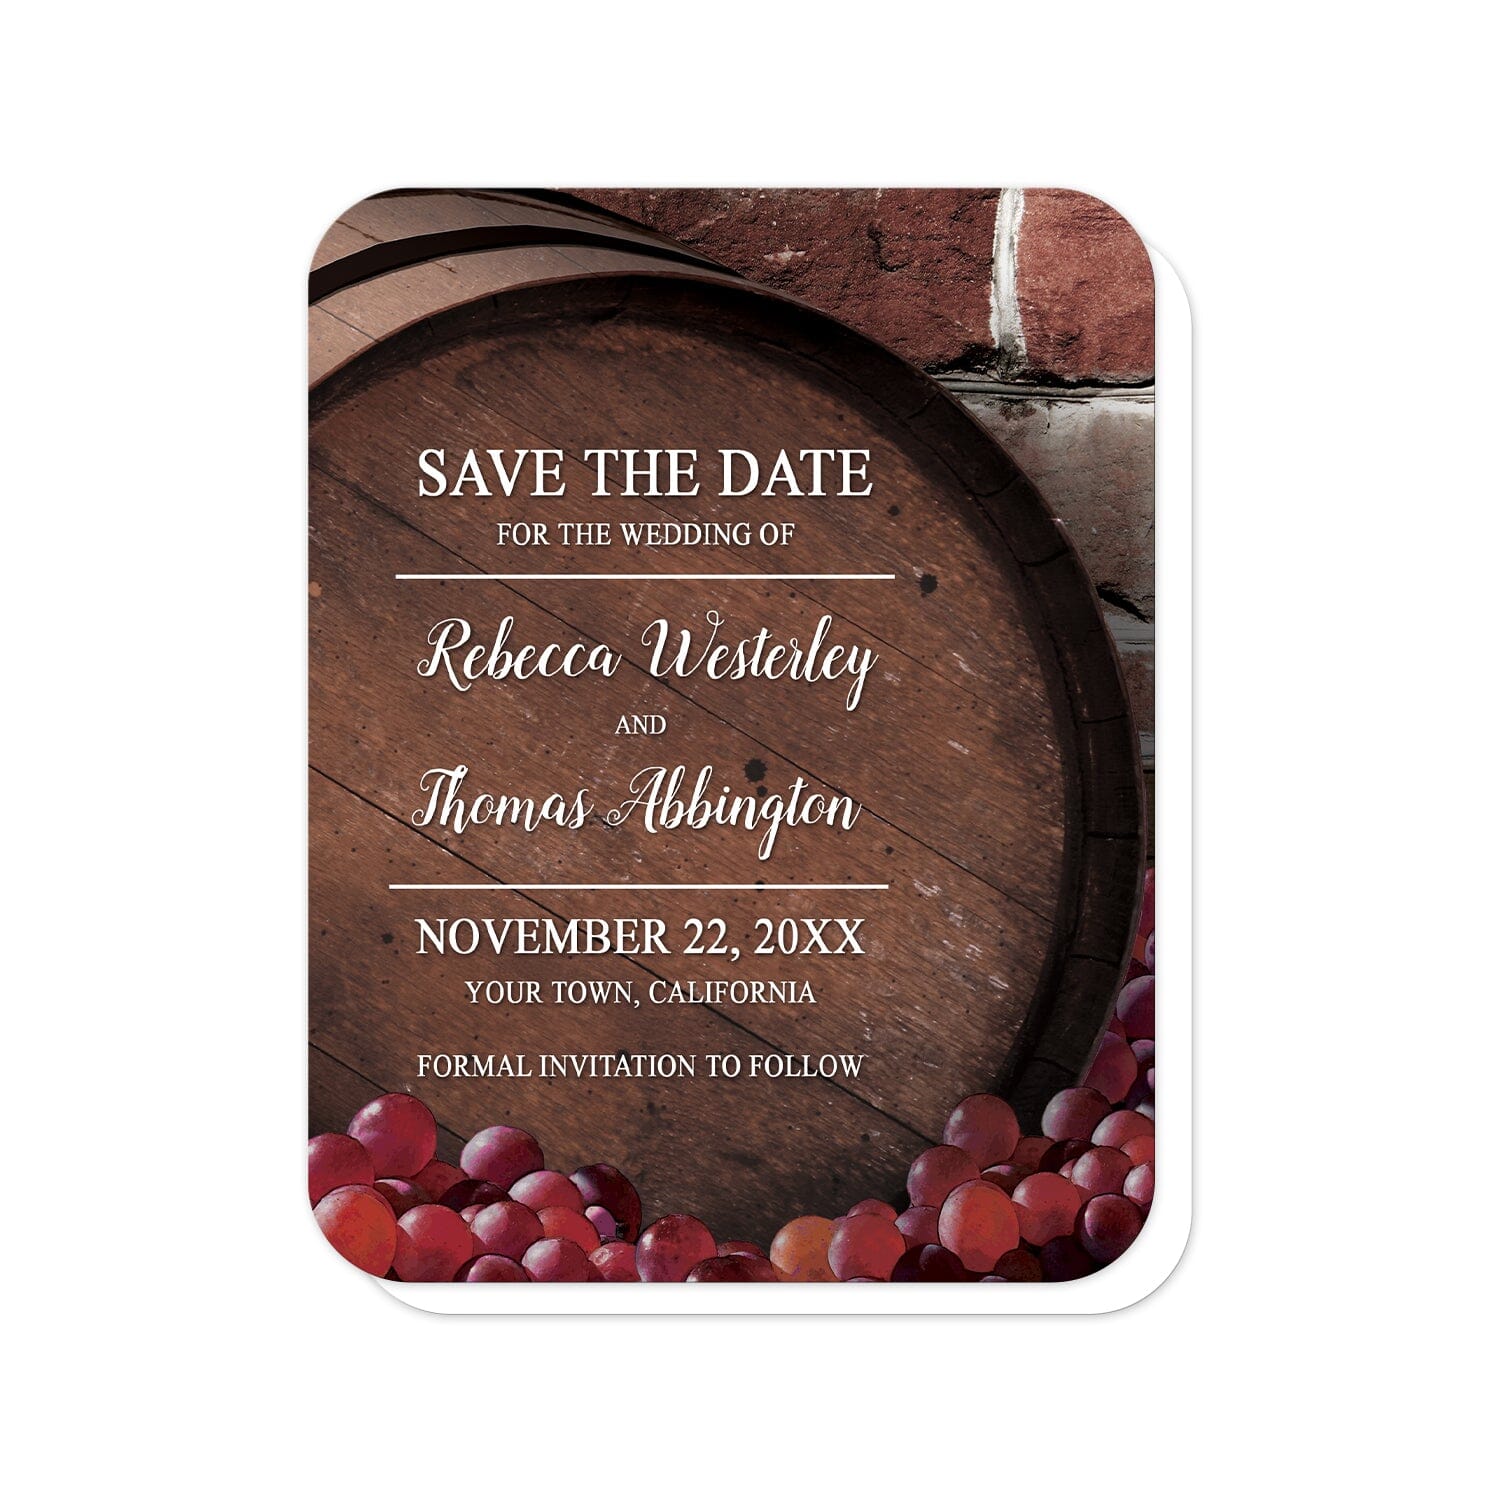 Rustic Wine Barrel Vineyard Save the Date Cards (with rounded corners) at Artistically Invited. Beautiful rustic wine barrel vineyard save the date cards designed with a large wooden wine barrel and grapes illustration in front of a brick pattern background. Your personalized wedding date details are custom printed in white fonts and lines over the top side of the barrel.